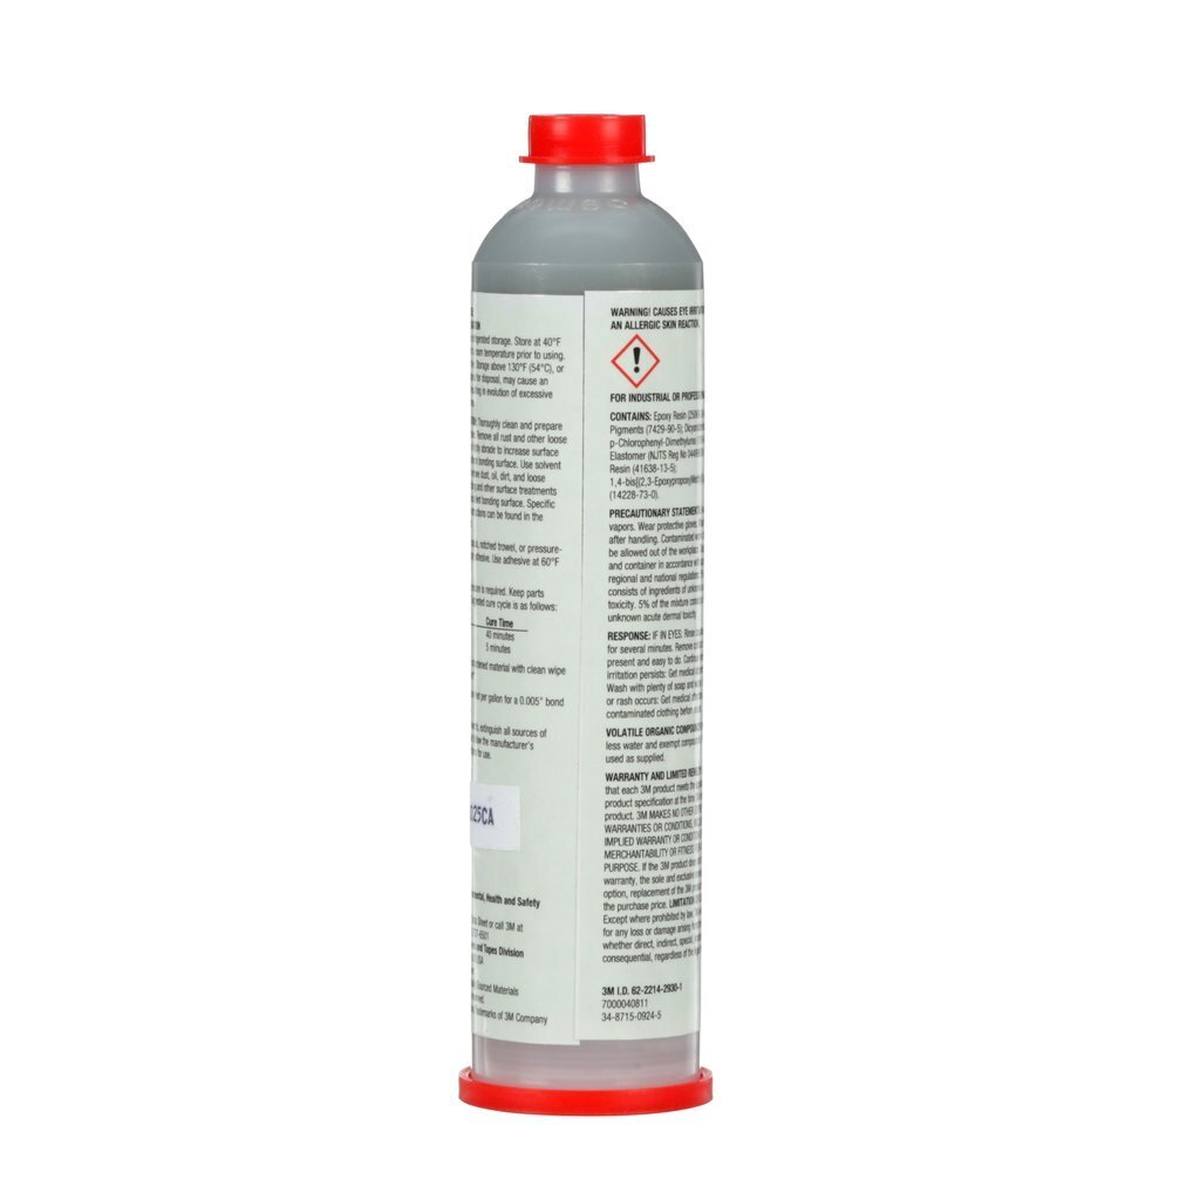 3M Scotch-Weld 1-component construction adhesive based on epoxy resin 2214, gray, 0.177L